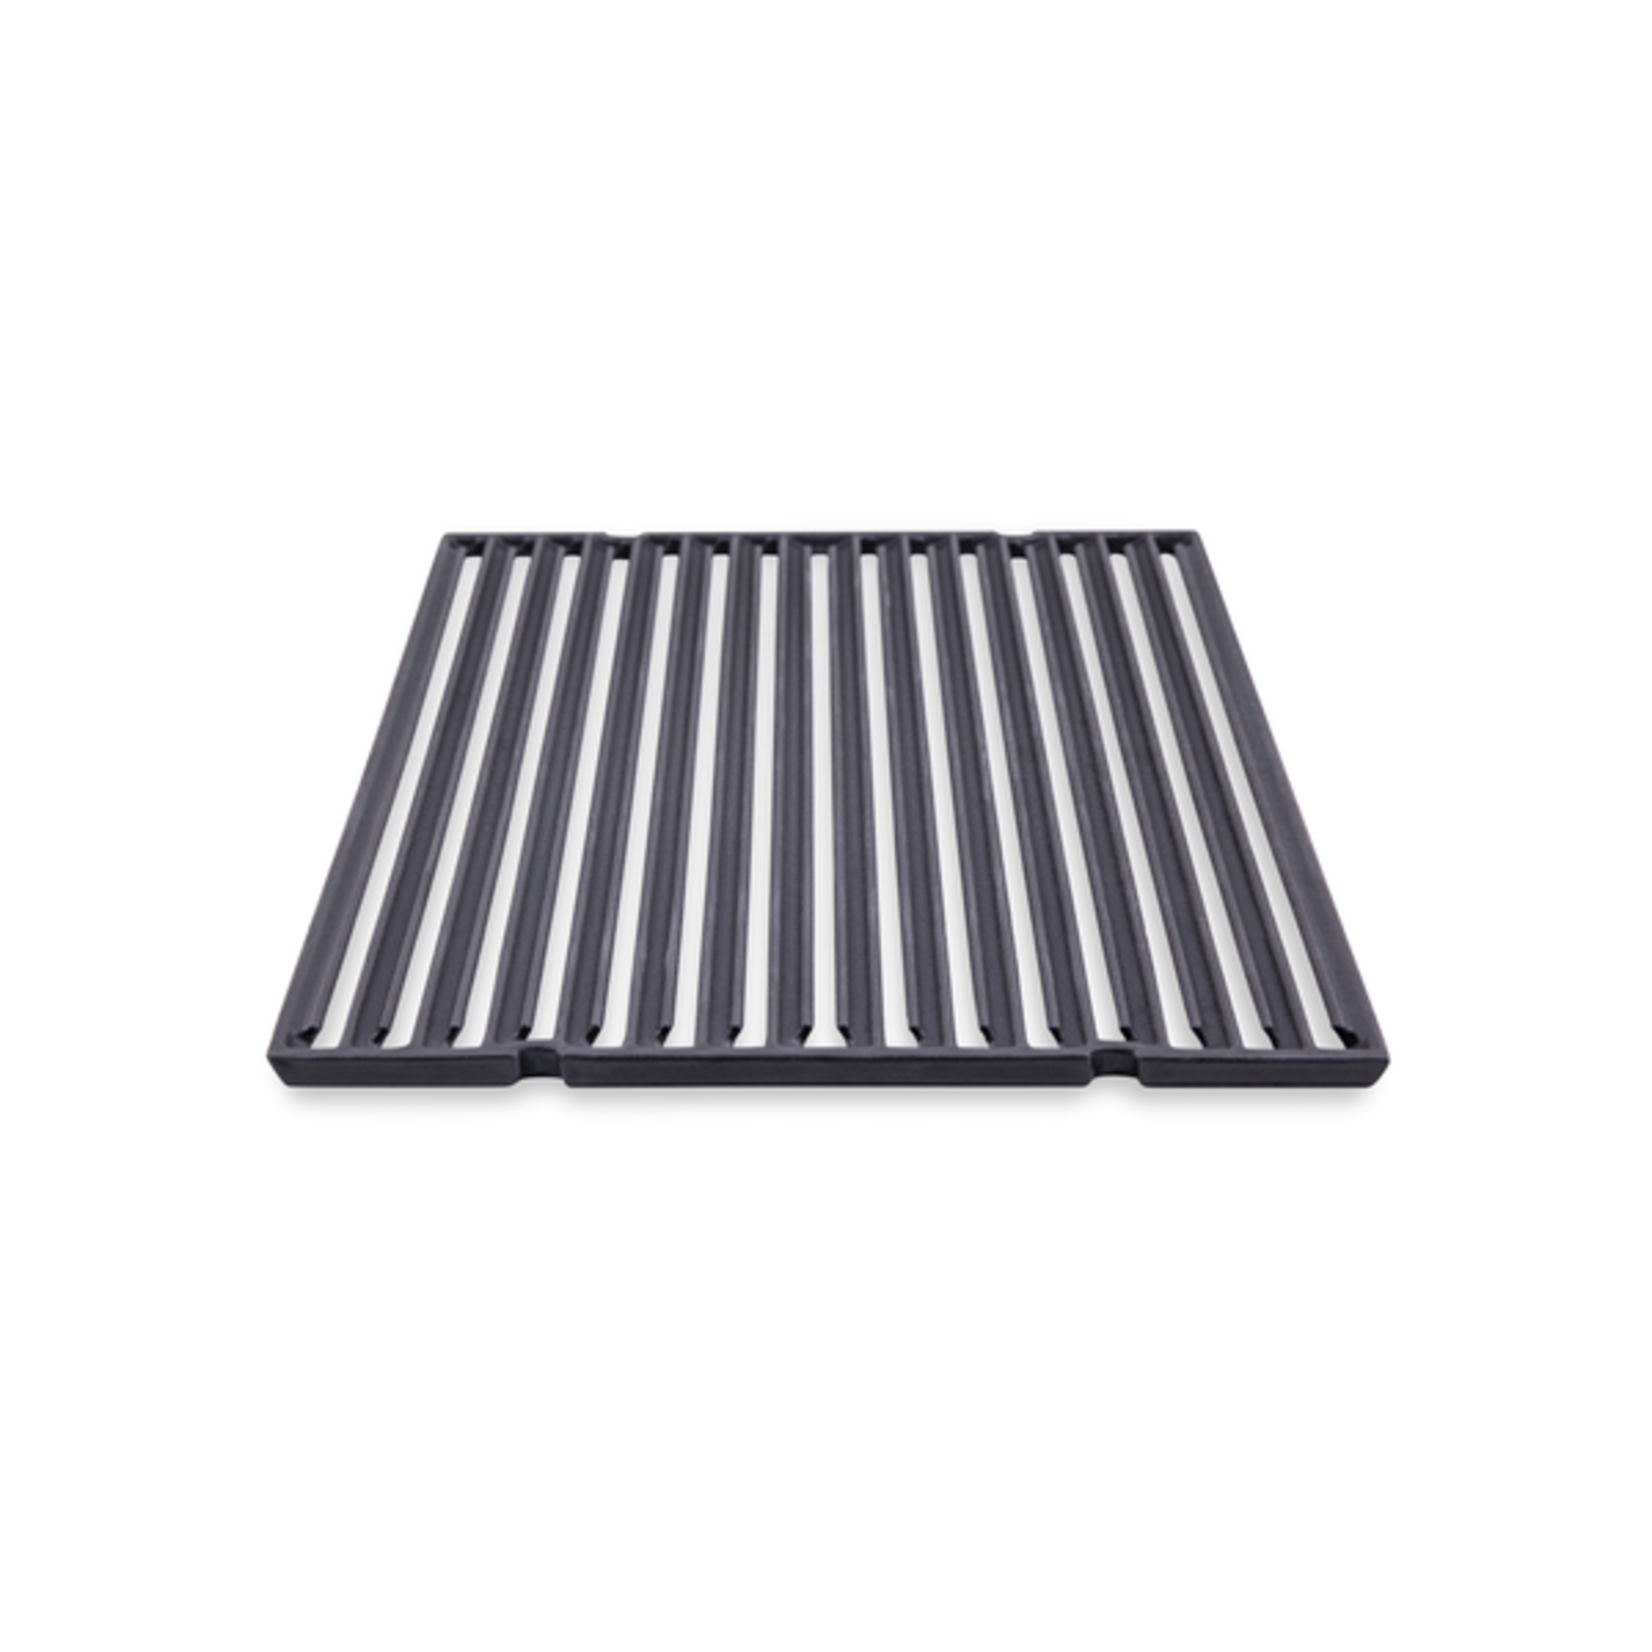 Broil King Cooking Grid - Signet/Crown - Cast Iron - 2 Pieces